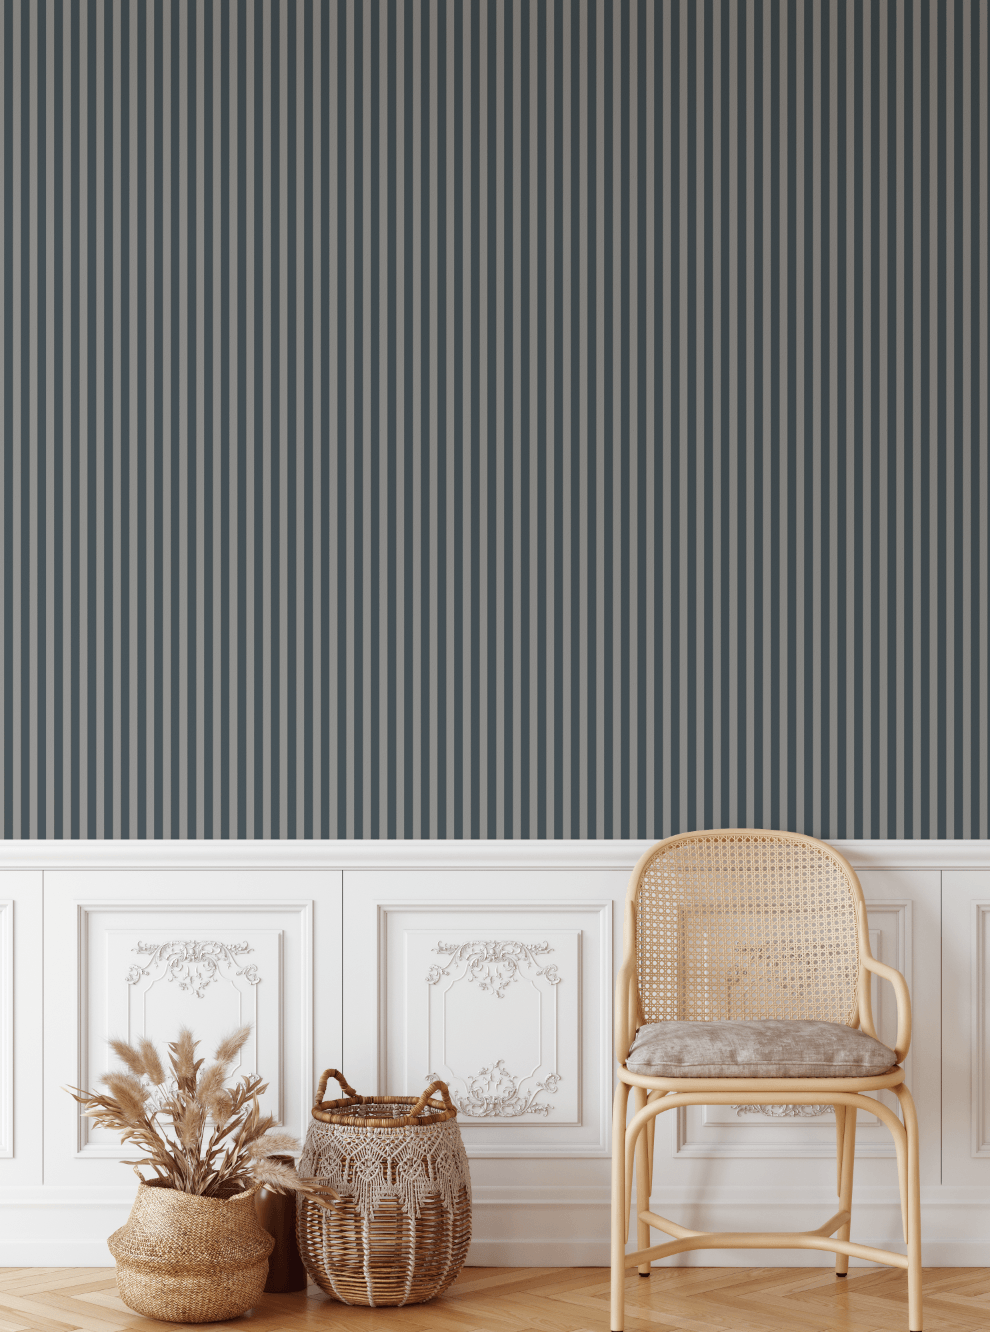 Blue Stripe Peel and Stick Wallpaper Removable Wallpaper for Walls